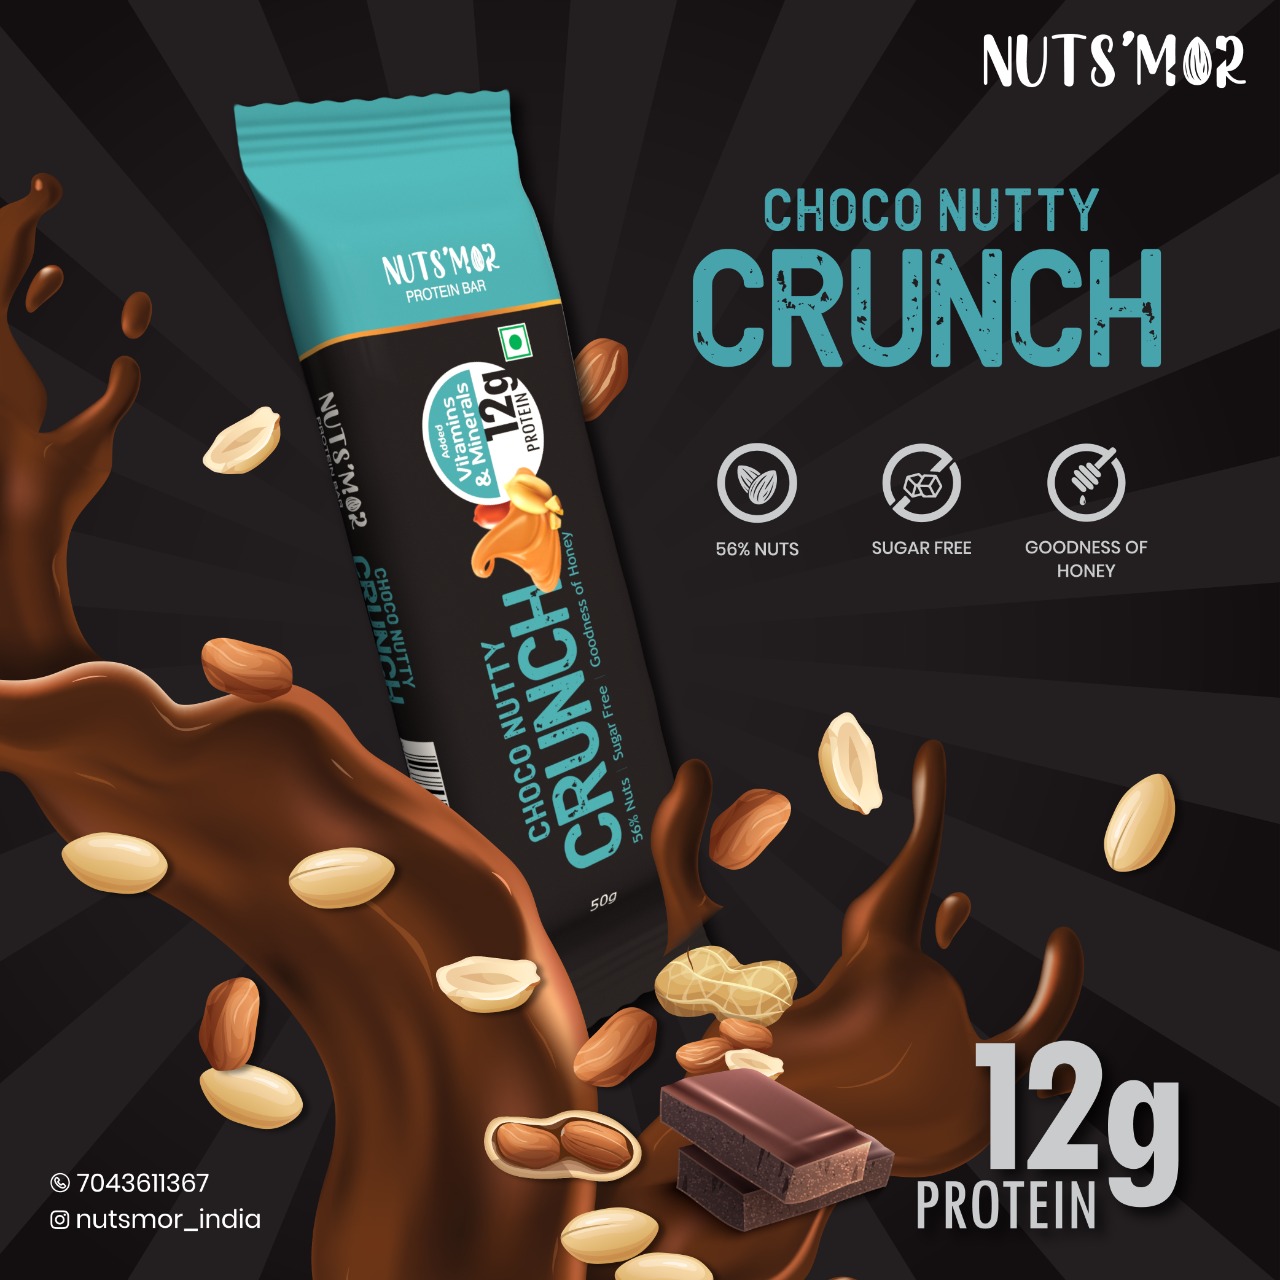 Nuts Mor Crunch protein bar